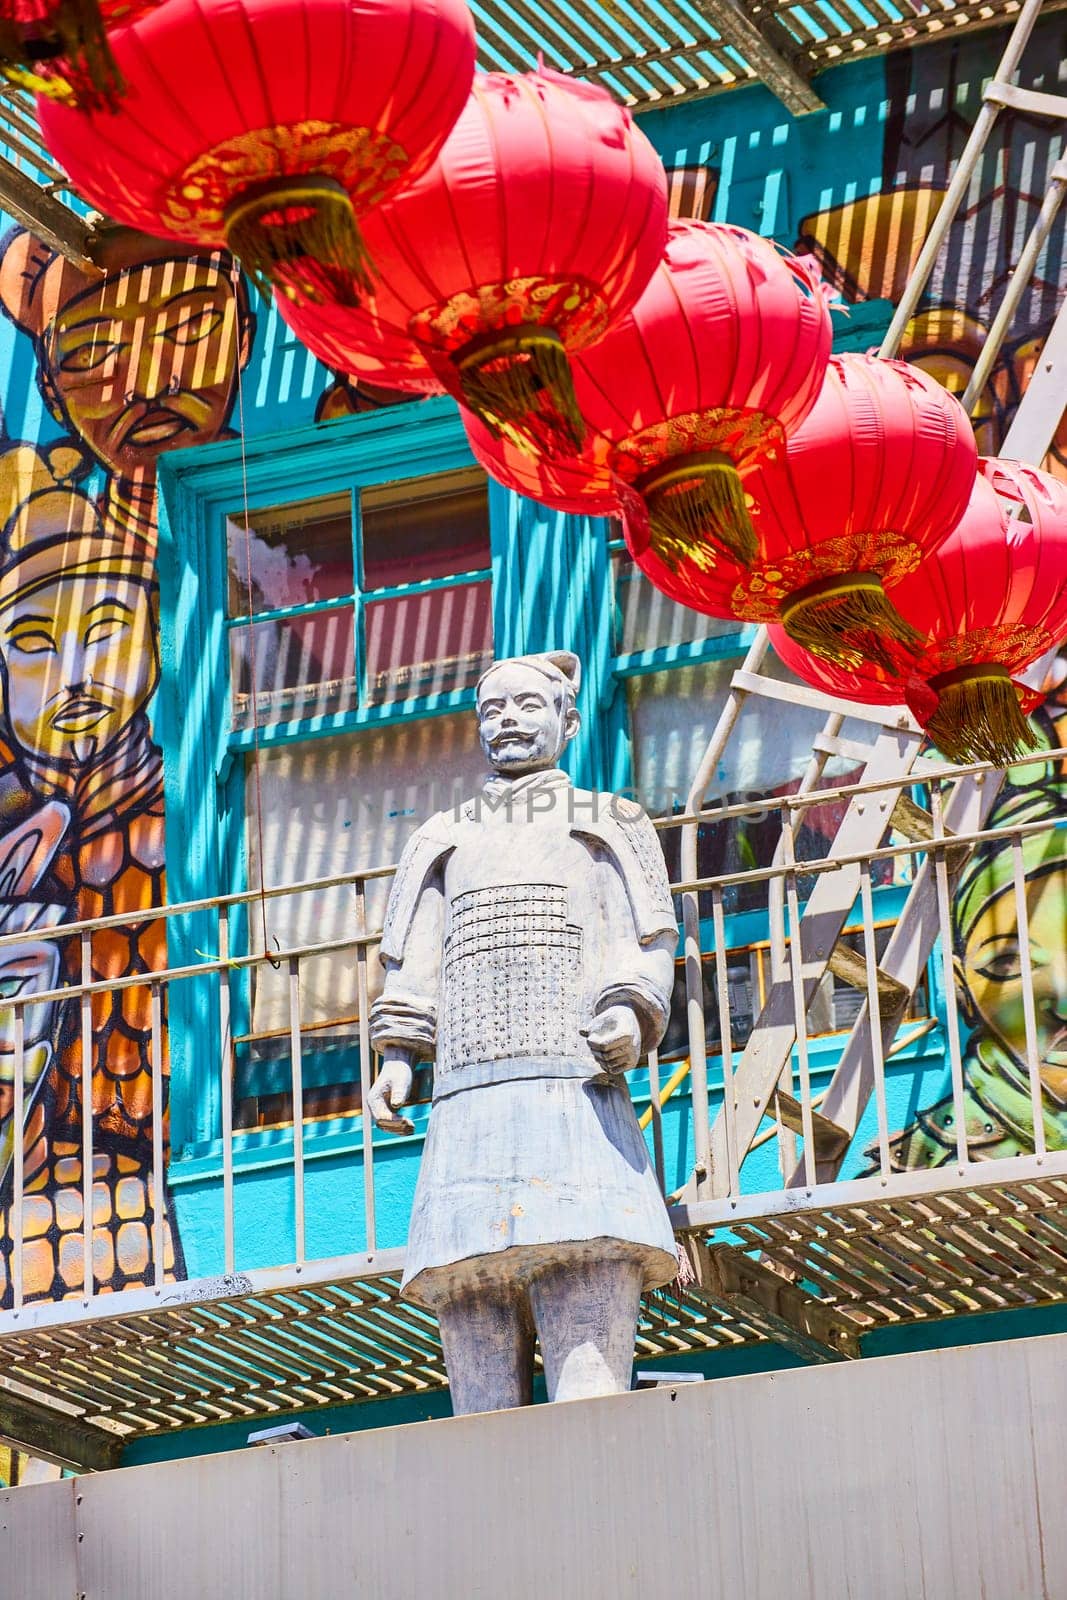 Image of Soldier statue of man standing in front of blue windows and painted mural with hanging red lanterns